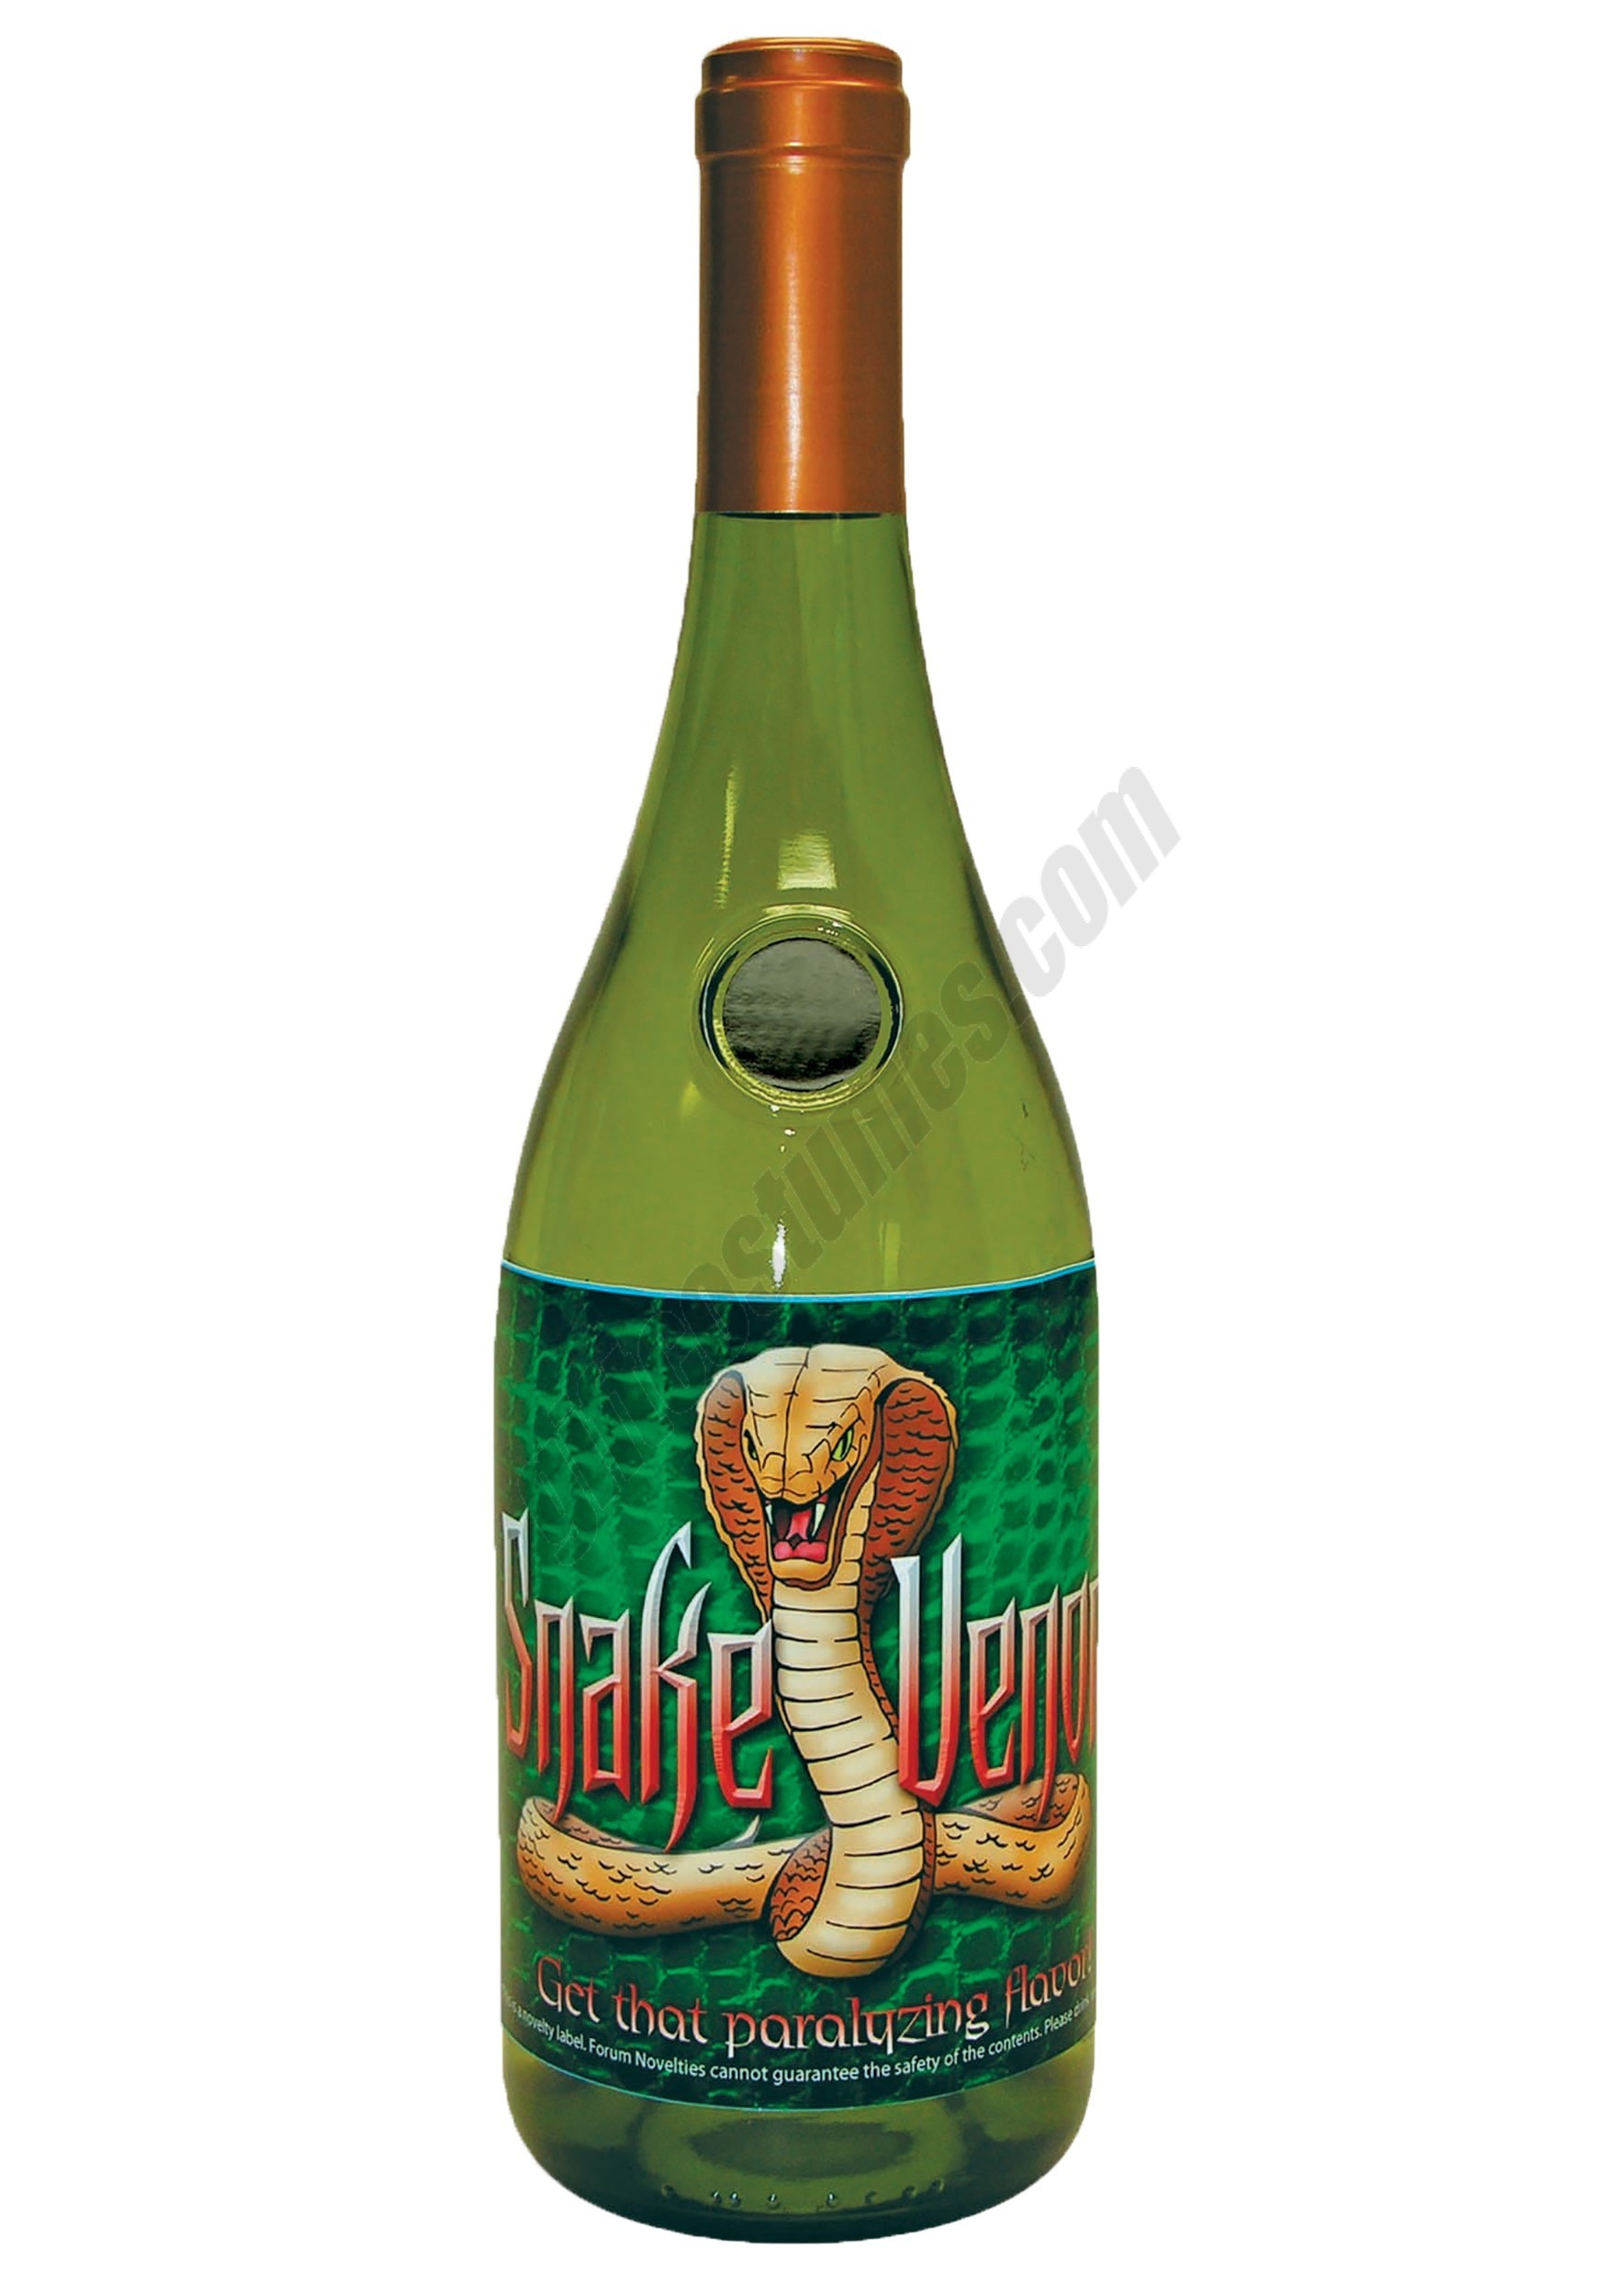 8 Scary Bottle Labels Set Promotions - 8 Scary Bottle Labels Set Promotions